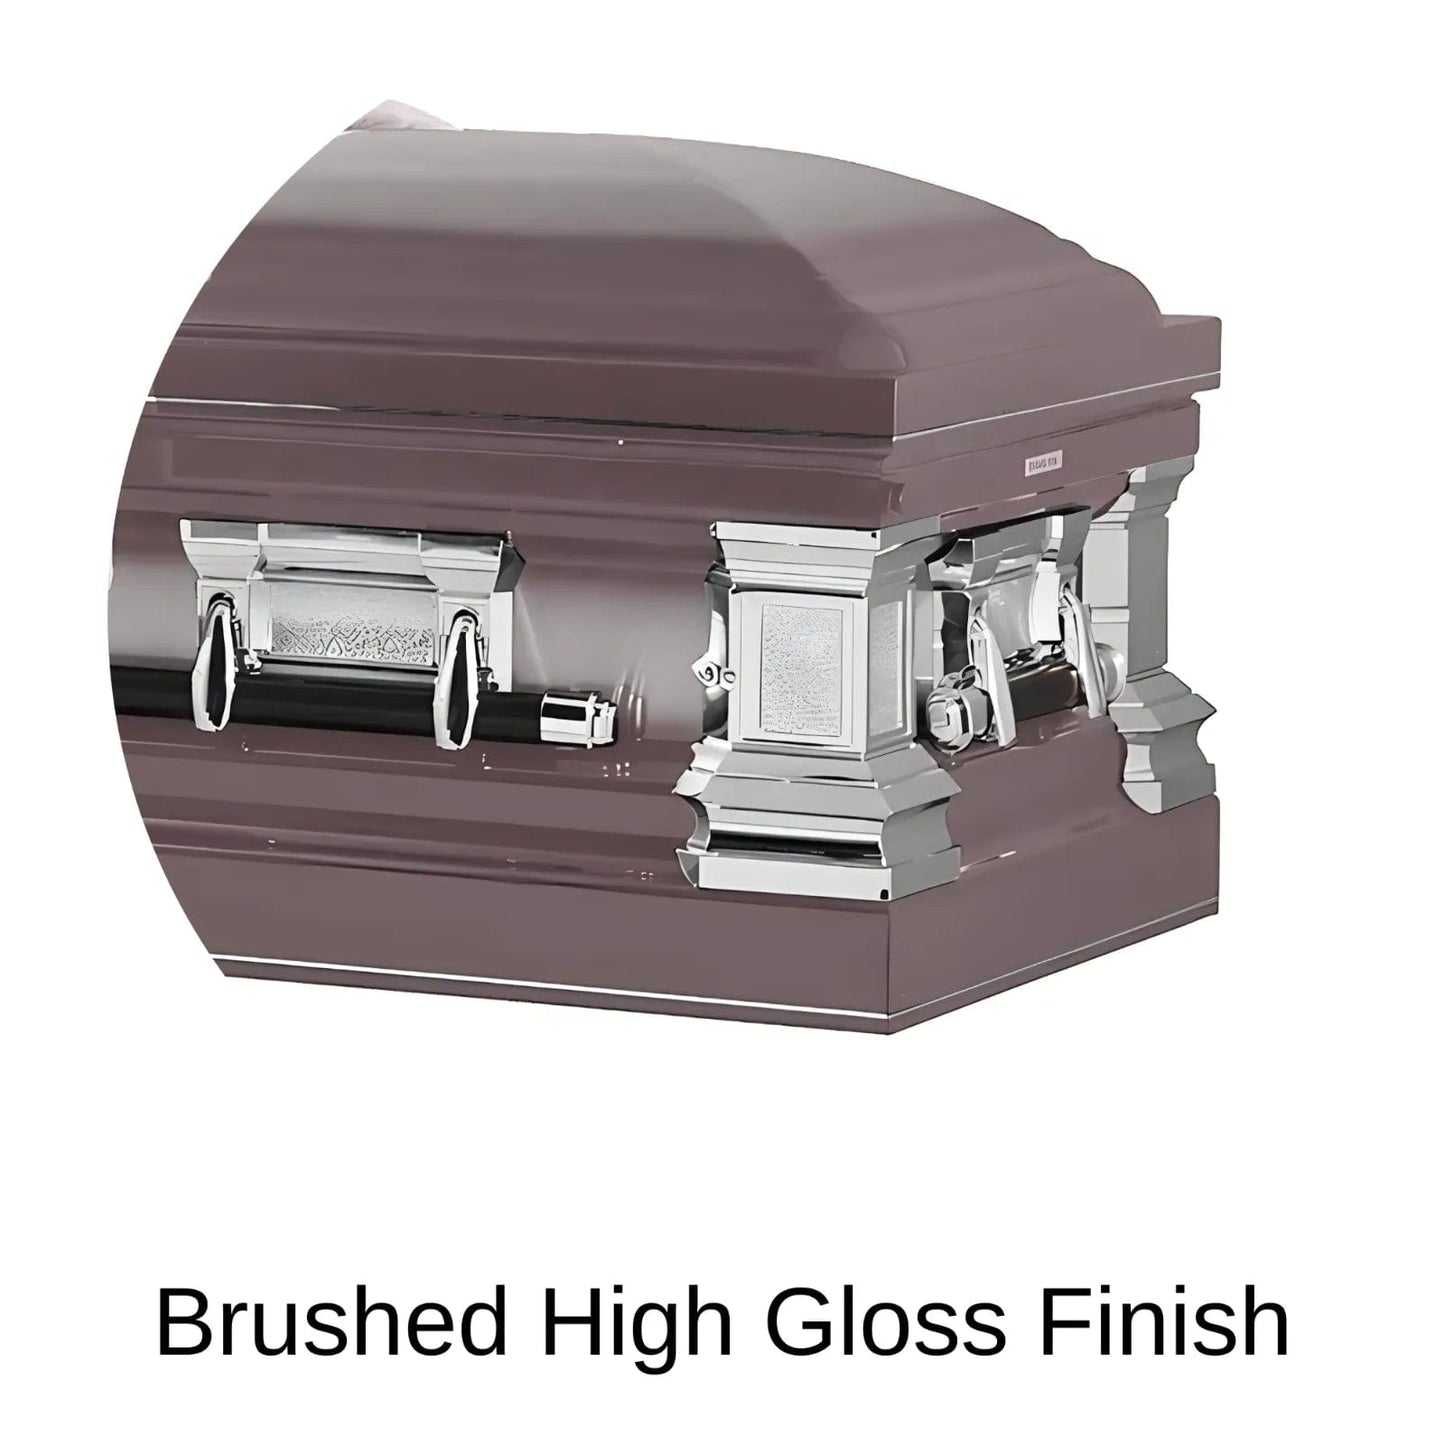 Era Stainless Series | Orchid Stainless Steel Casket with Pink Interior